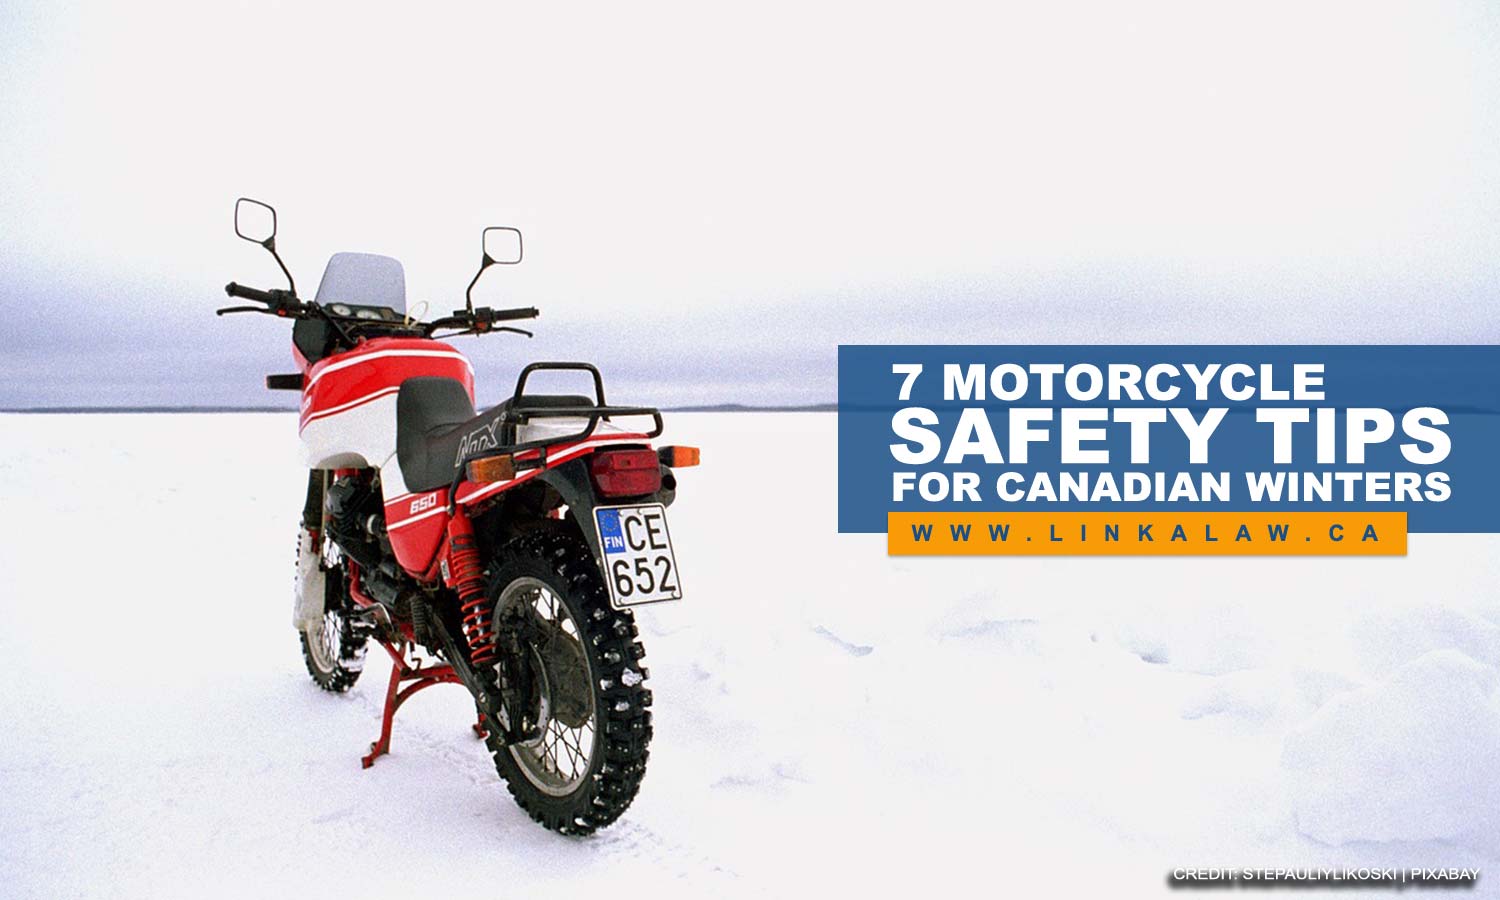 7 Motorcycle Safety Tips for Canadian Winters